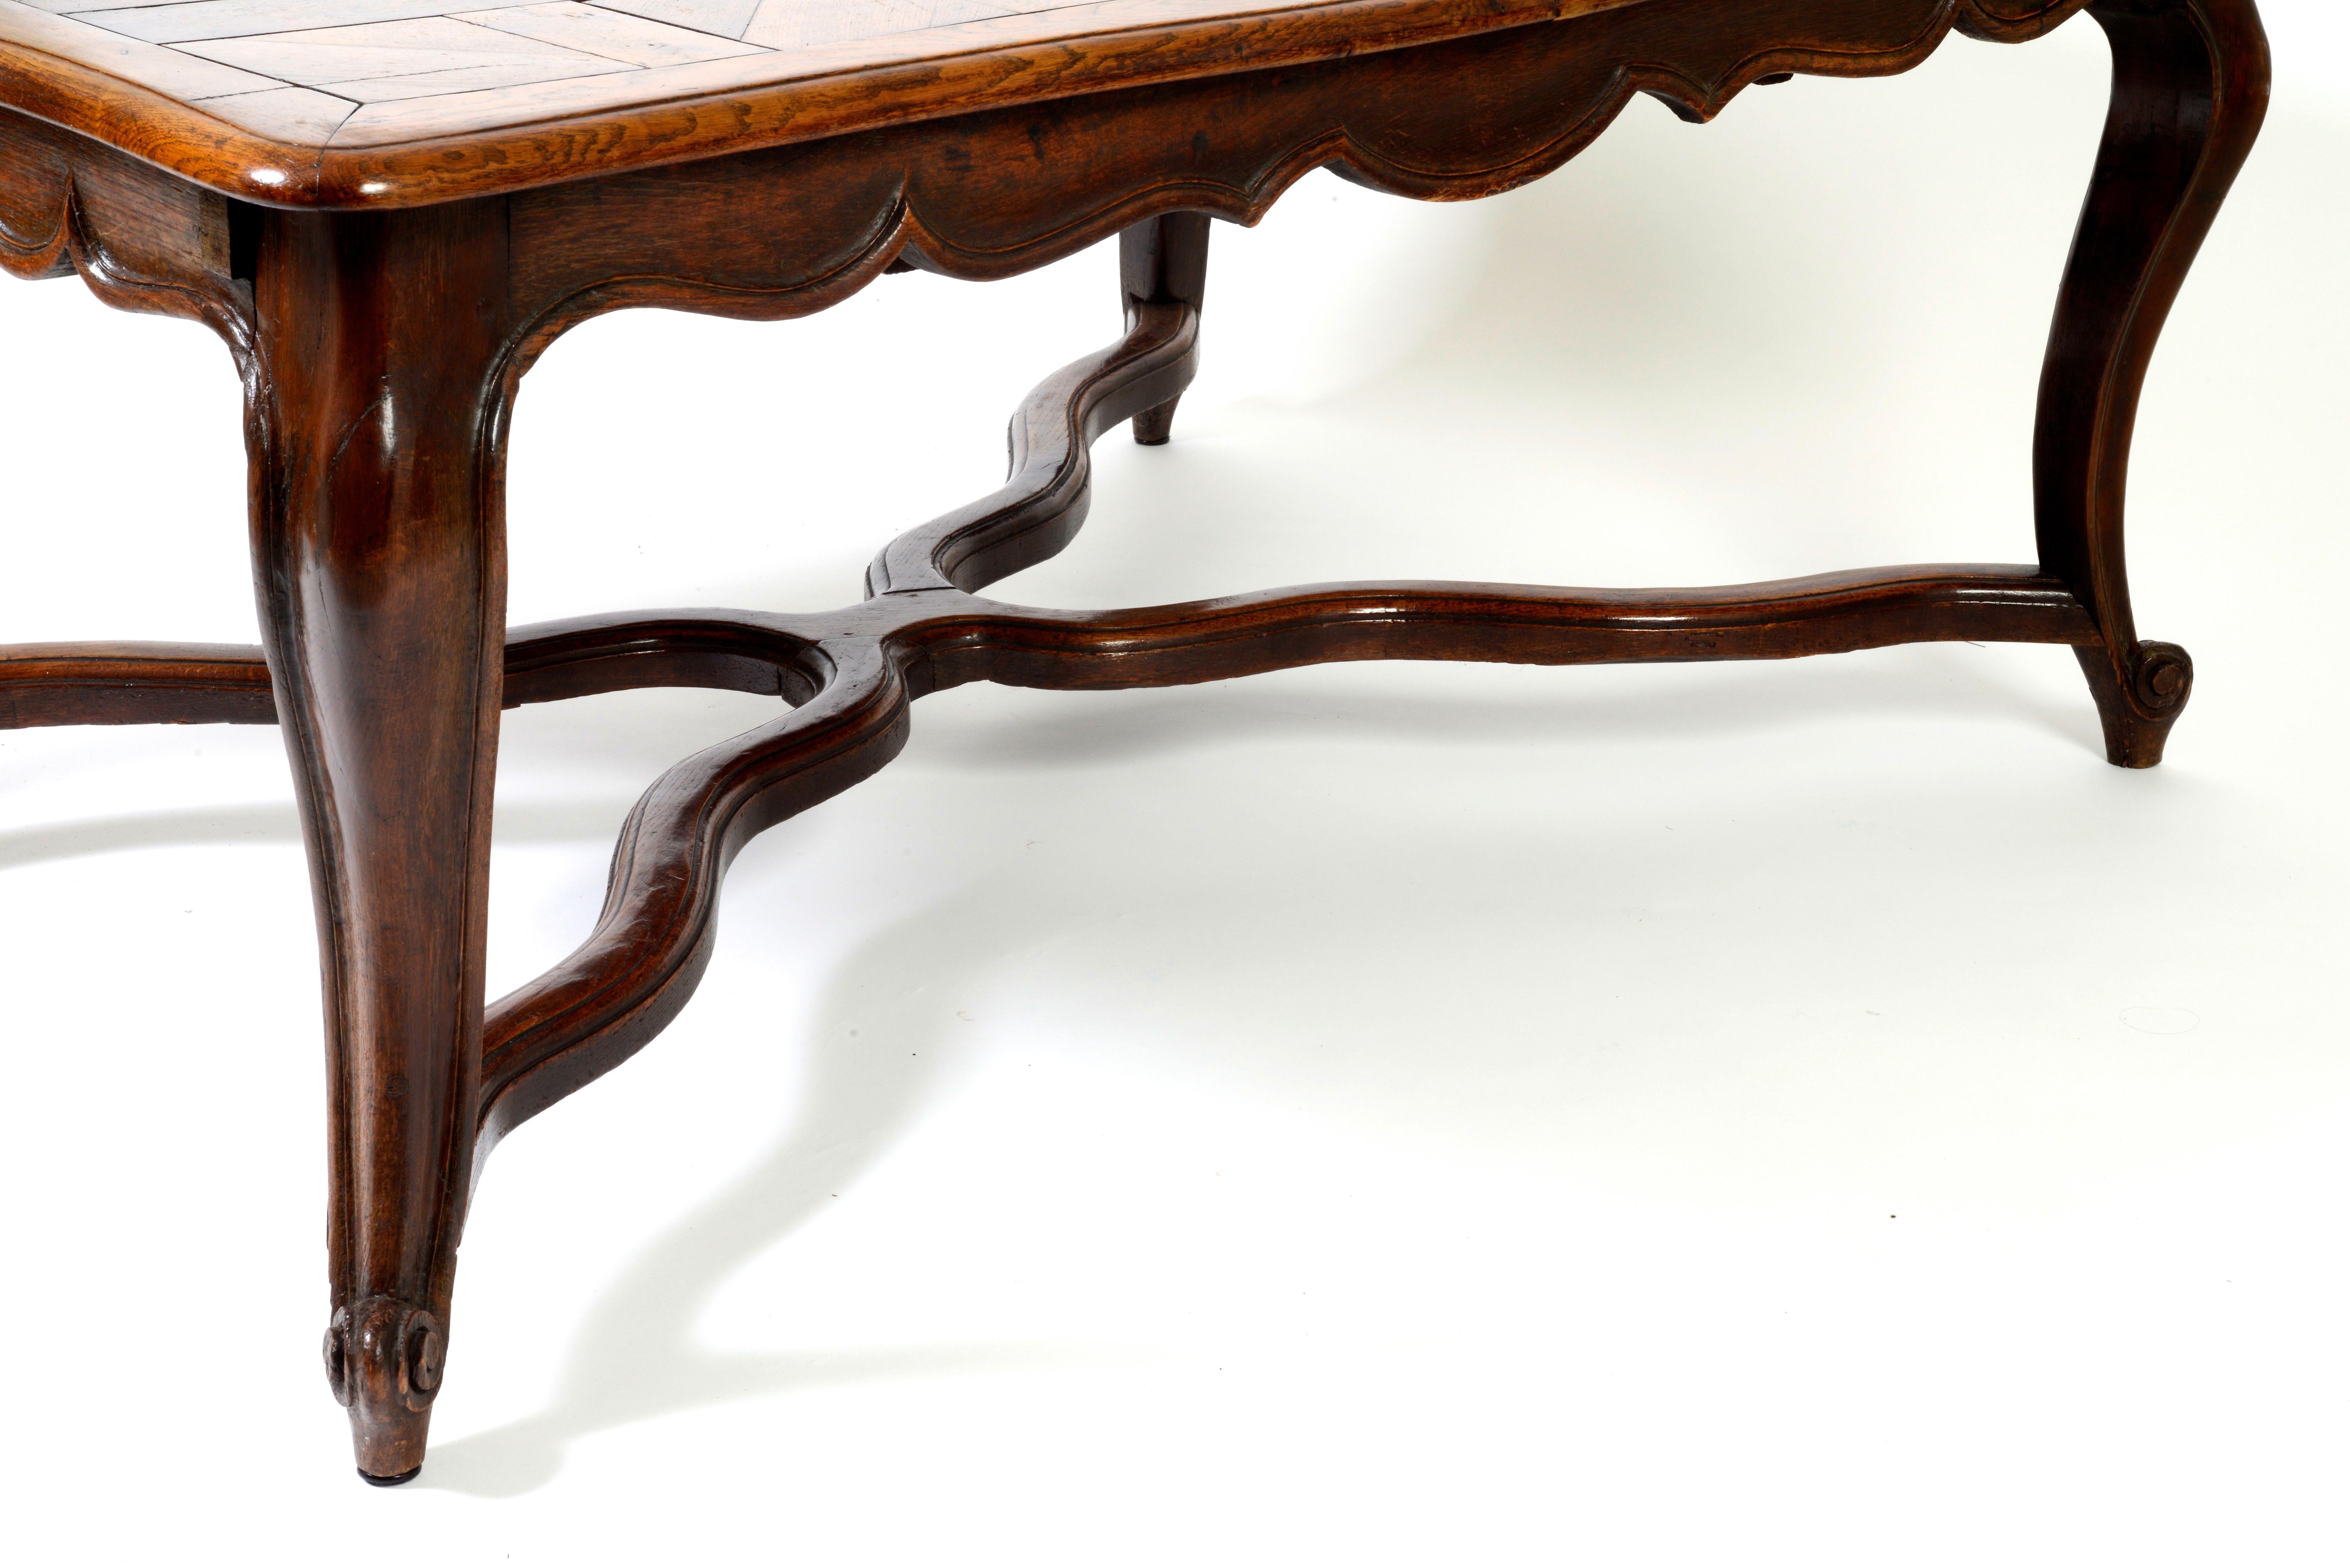 Provincial oak parquetry extending dining table with later base. The 18th century top separates and supports a large parquetry drop-in leaf. The base has a scalloped apron, curving 